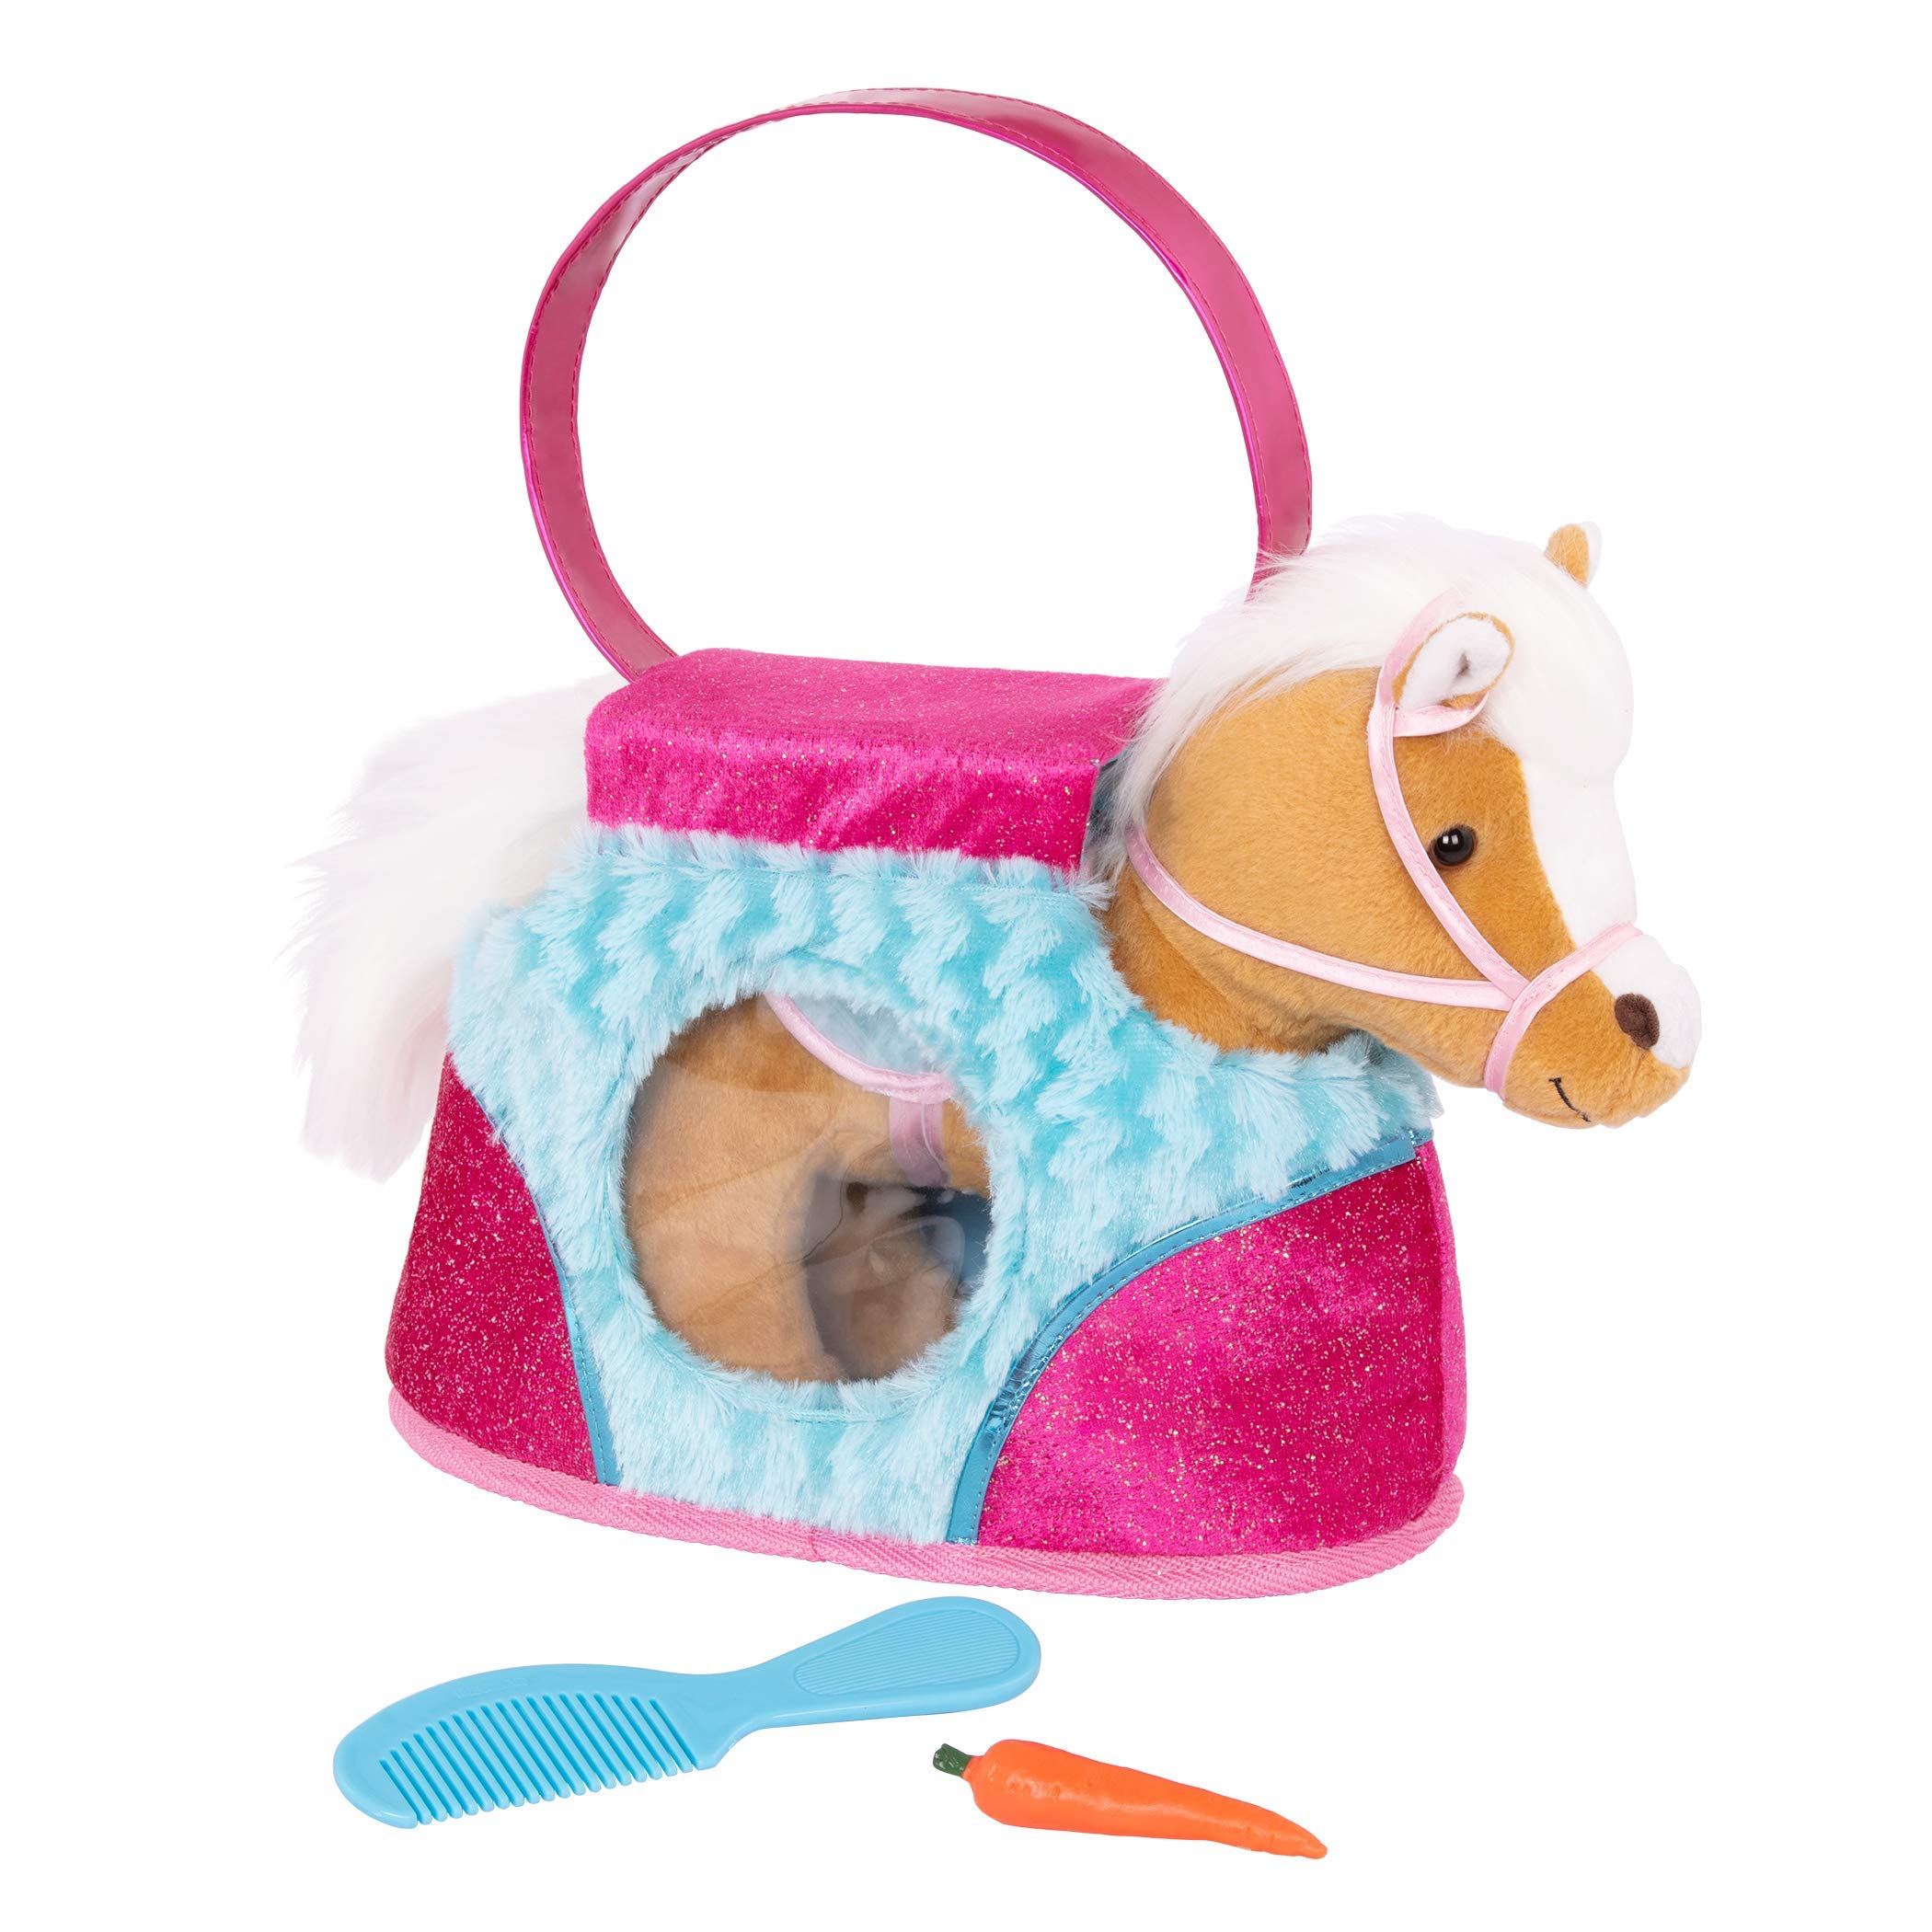 Pucci Pups by Battat – Beige Horse with Blue Stripes and Pink Pony Bag (ST8274Z) 10 inches